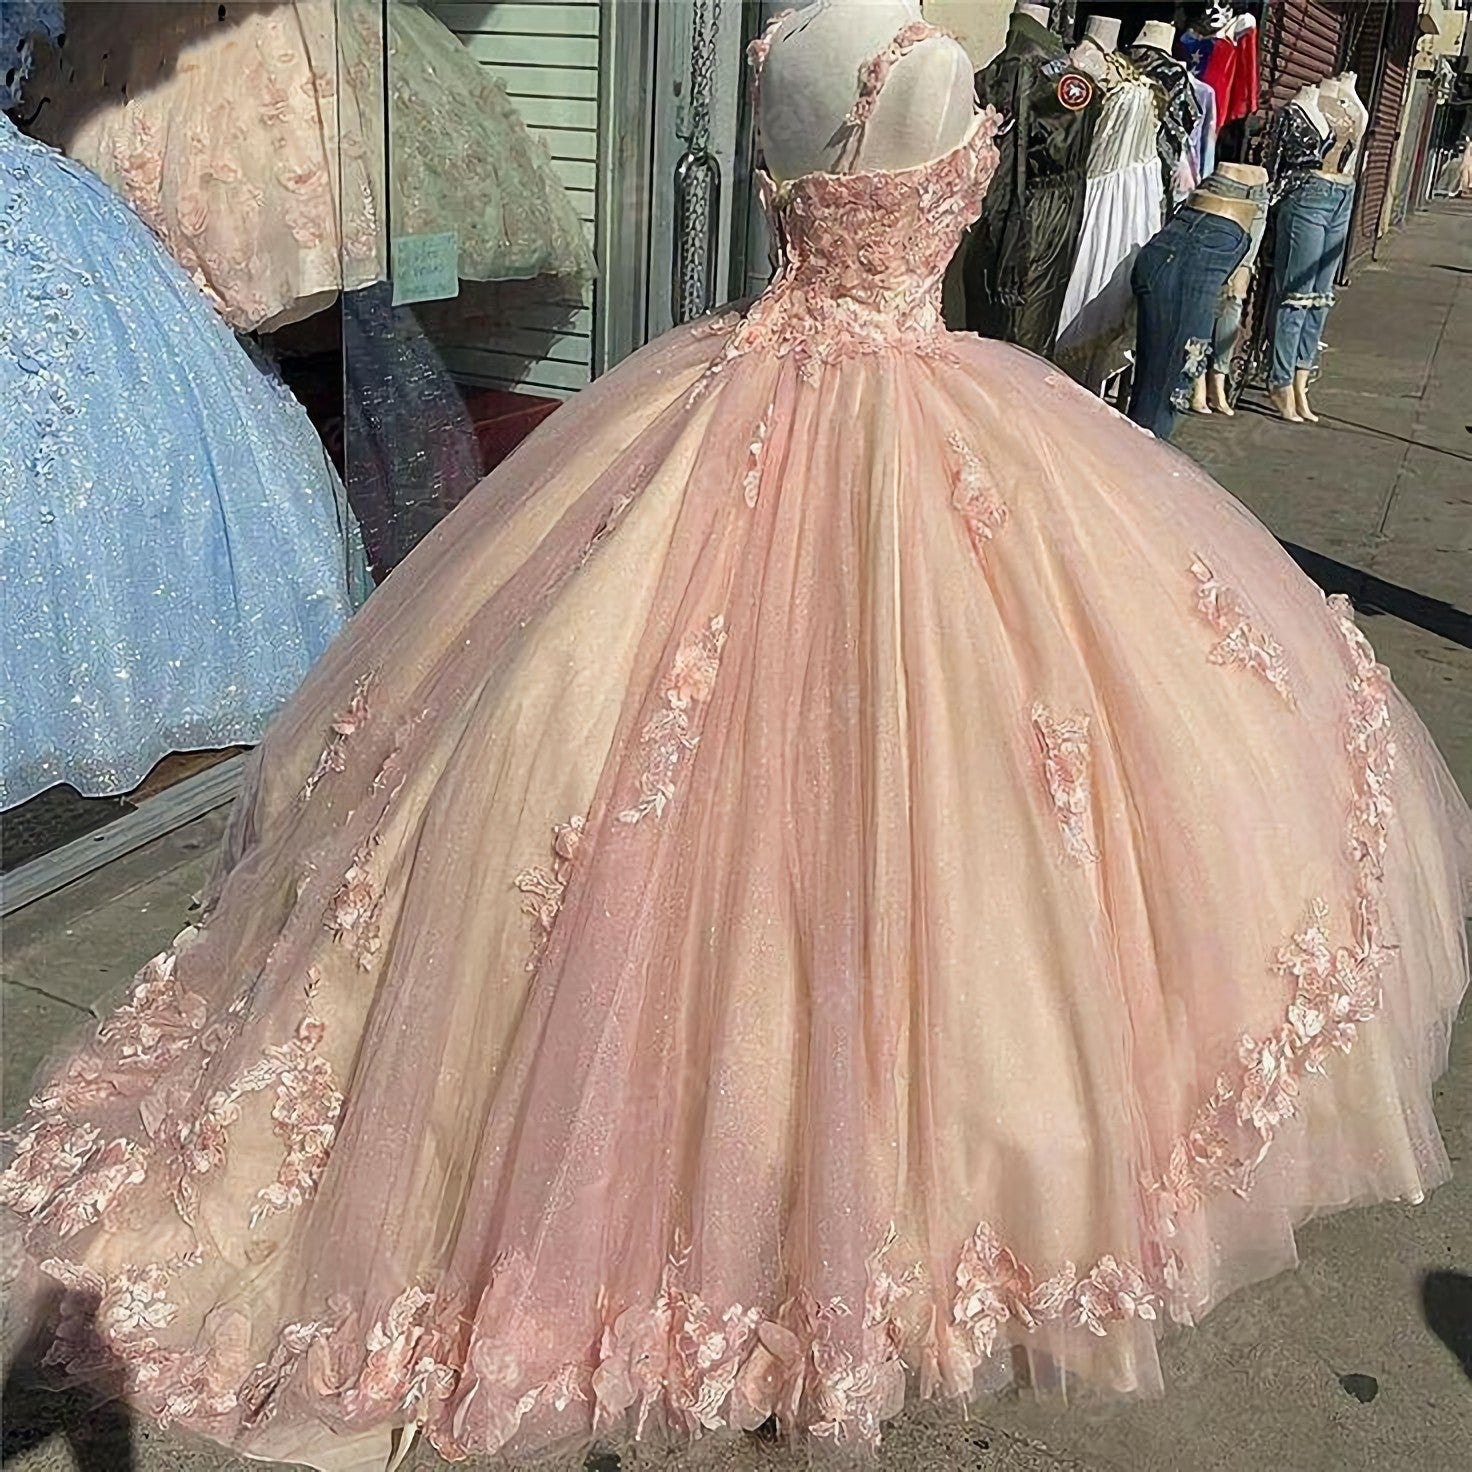 Pink Sparkly Quinceanera Corset Prom Dresses, Lace Flower Sweet 16 Tulle Party Corset Ball Gown outfits, Homecoming Dresses Beautiful